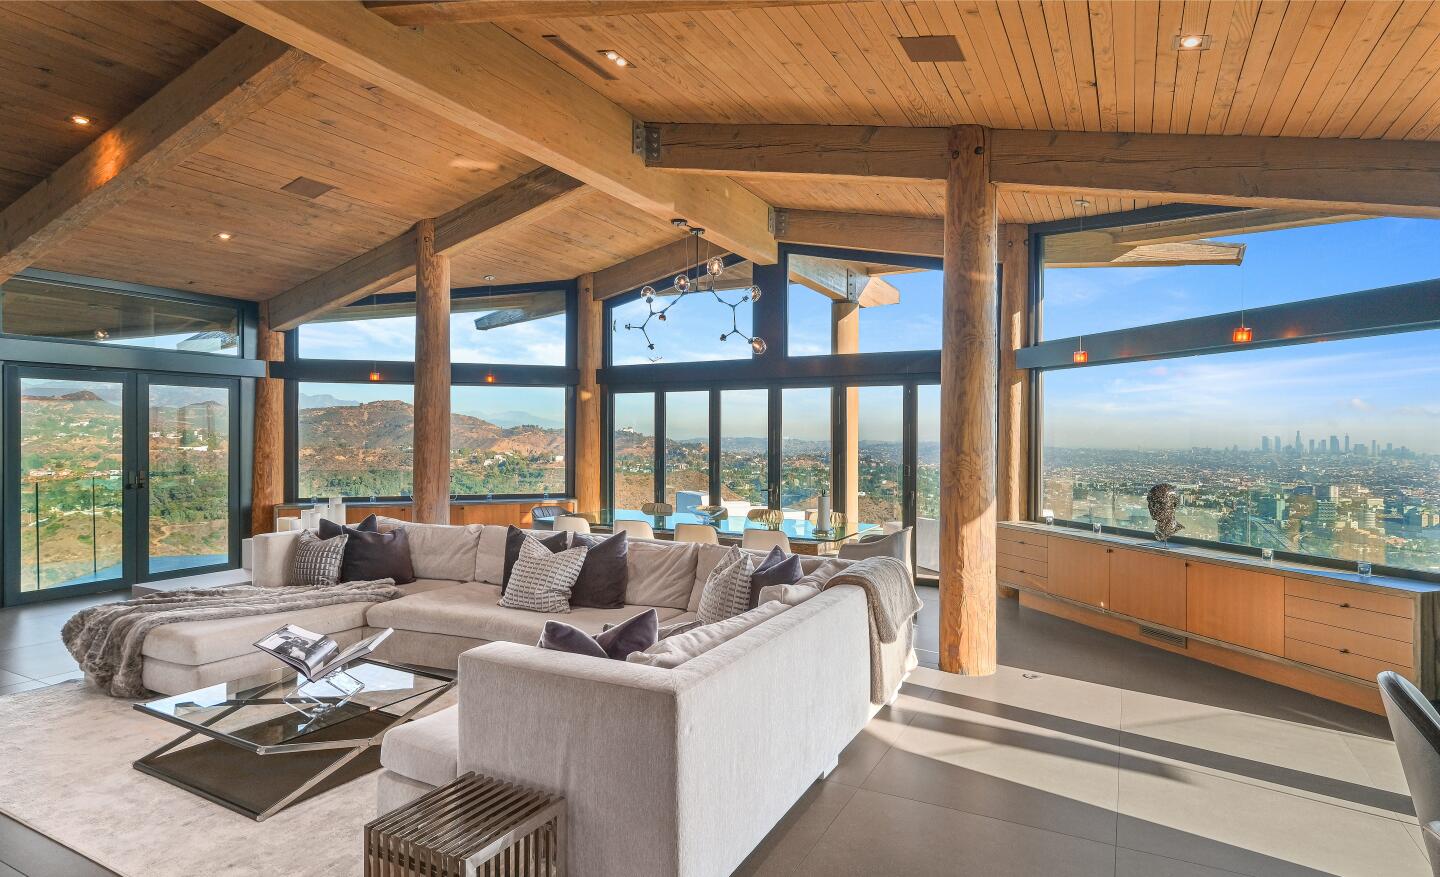 Built in the '70s but updated since, the wood-and-glass abode enjoys 300-degree views of the city below.